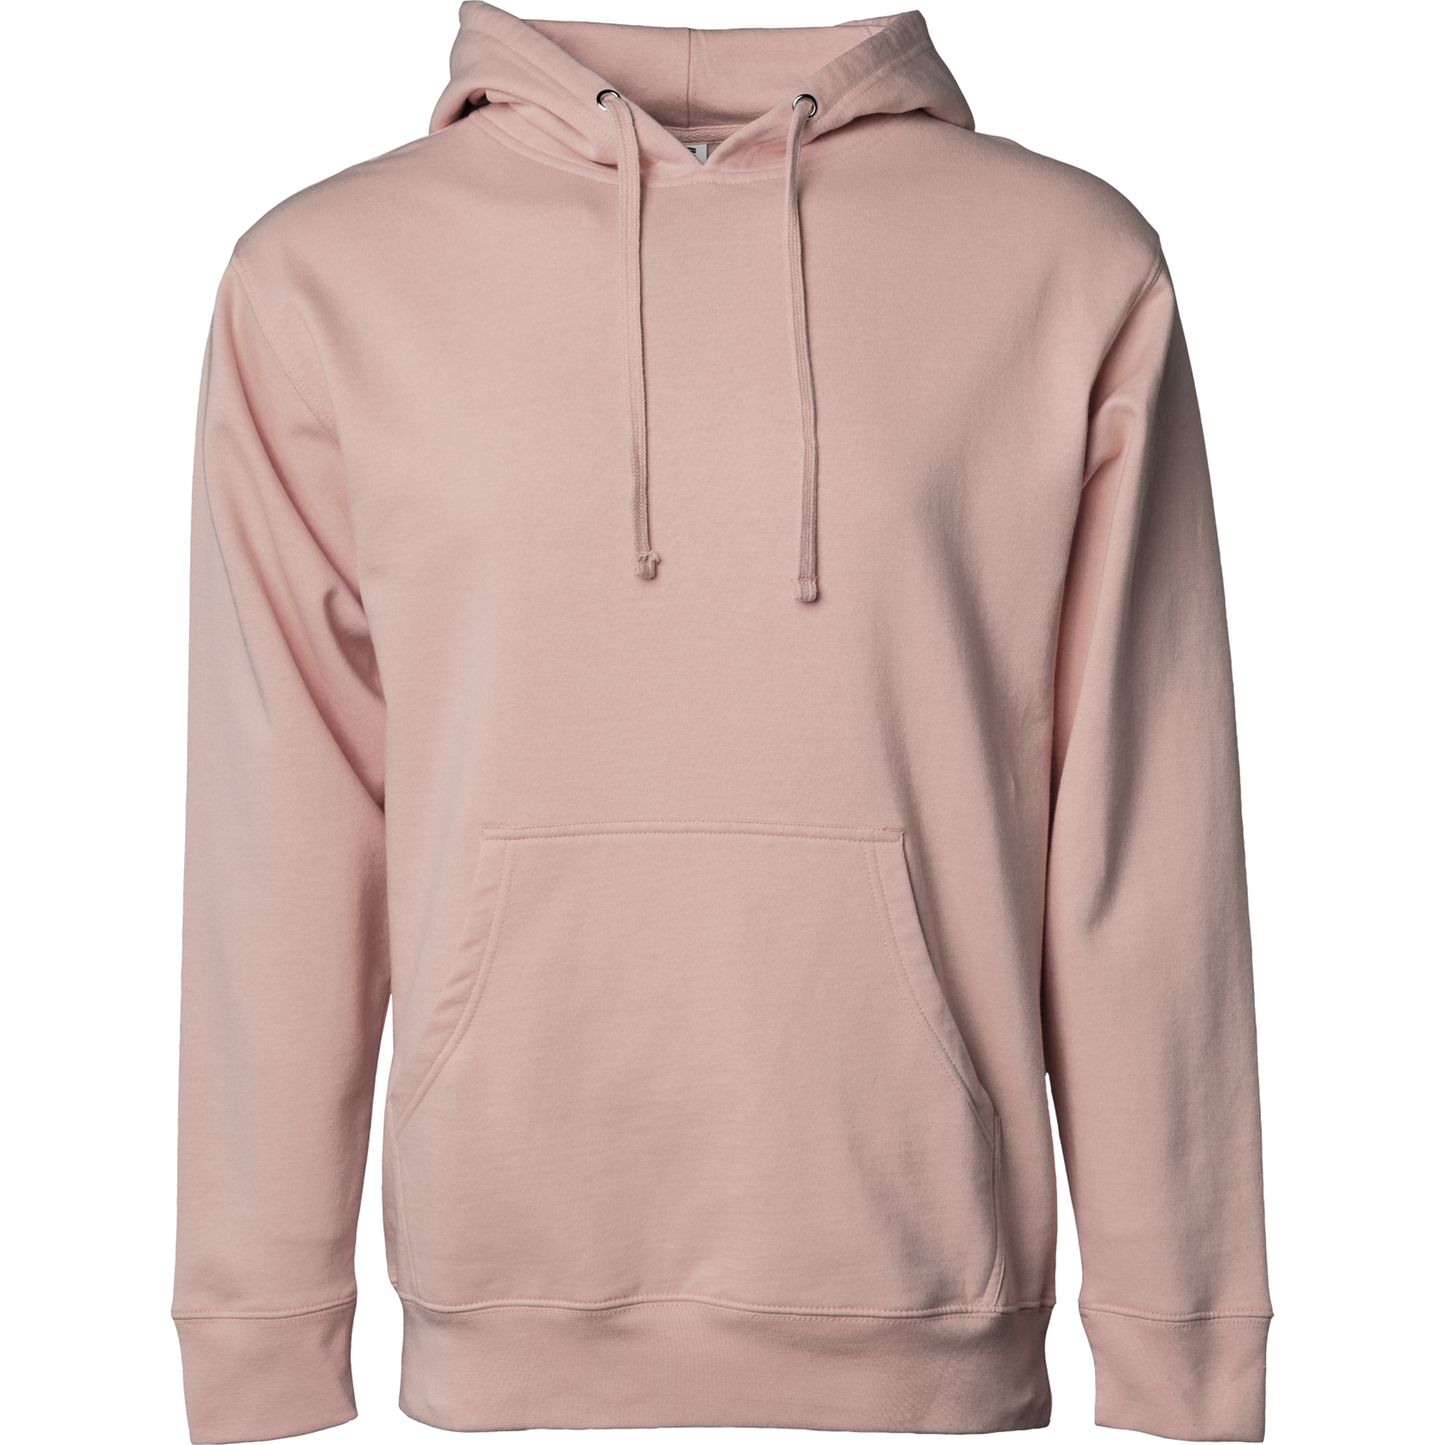 SS4500 Midweight Hooded Pullover Sweatshirt - Dusty Pink